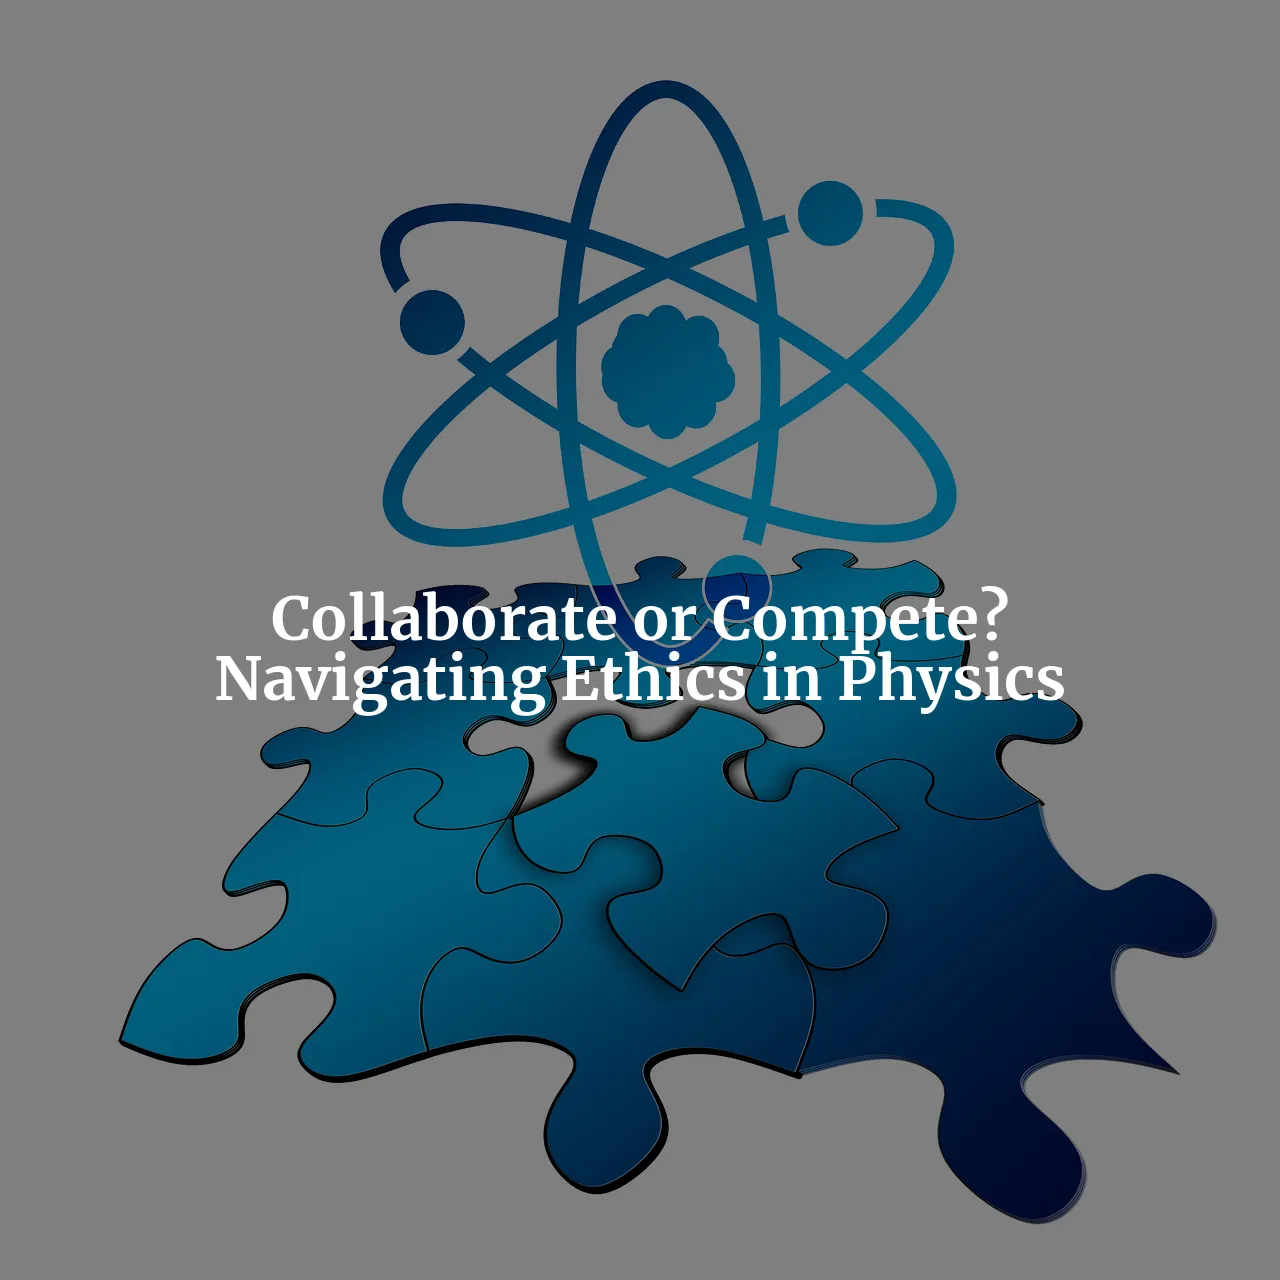 Collaborate or Compete? Navigating the Ethics of Scientific Collaboration in Physics Research